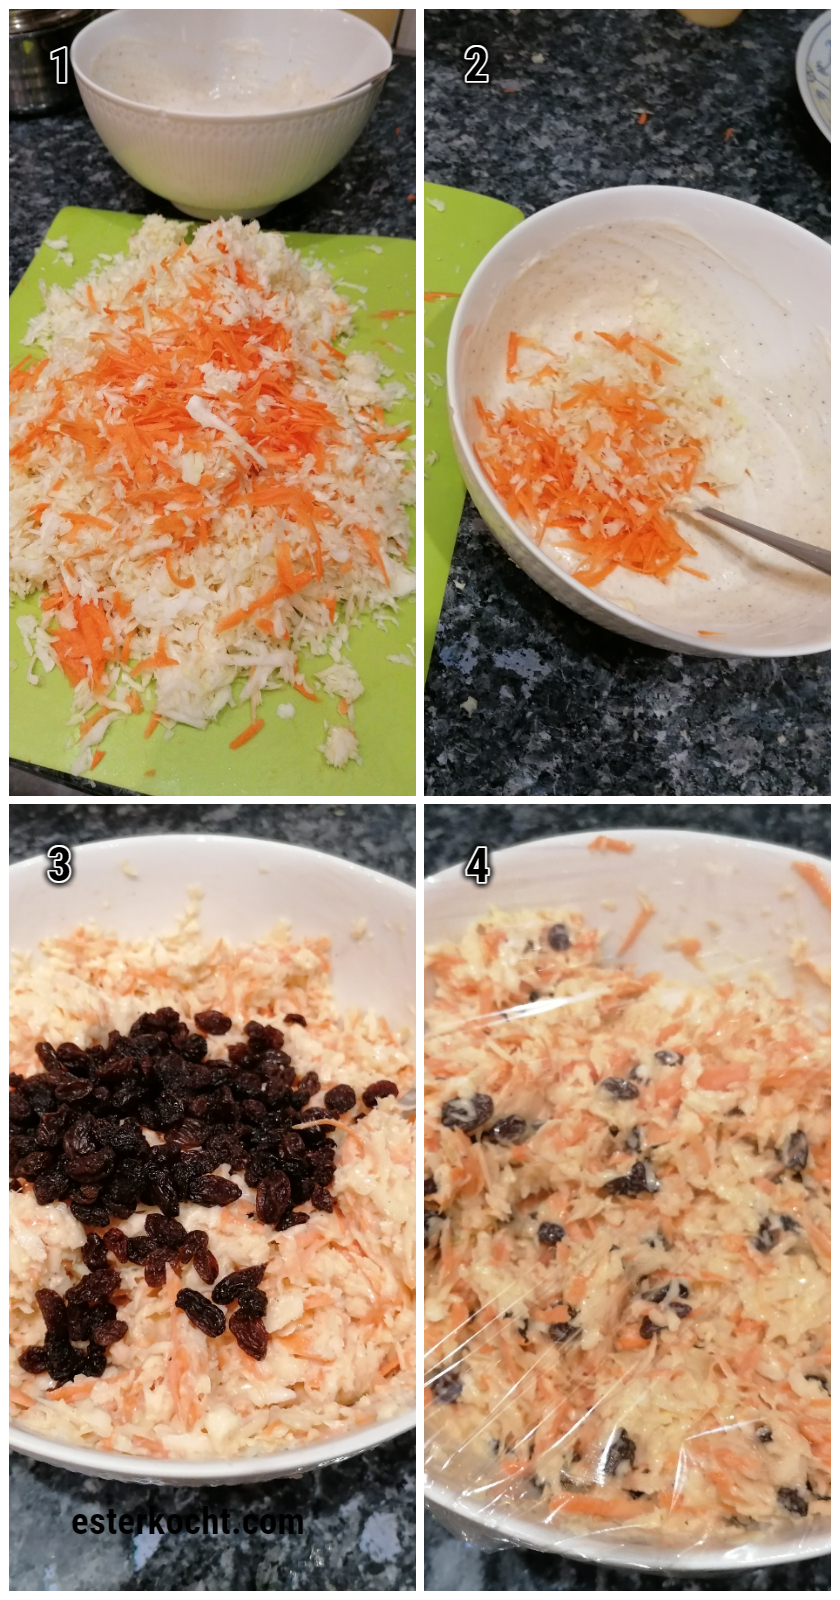 A photo collage showing how to make Namibian style coleslaw with carrots and raisins.